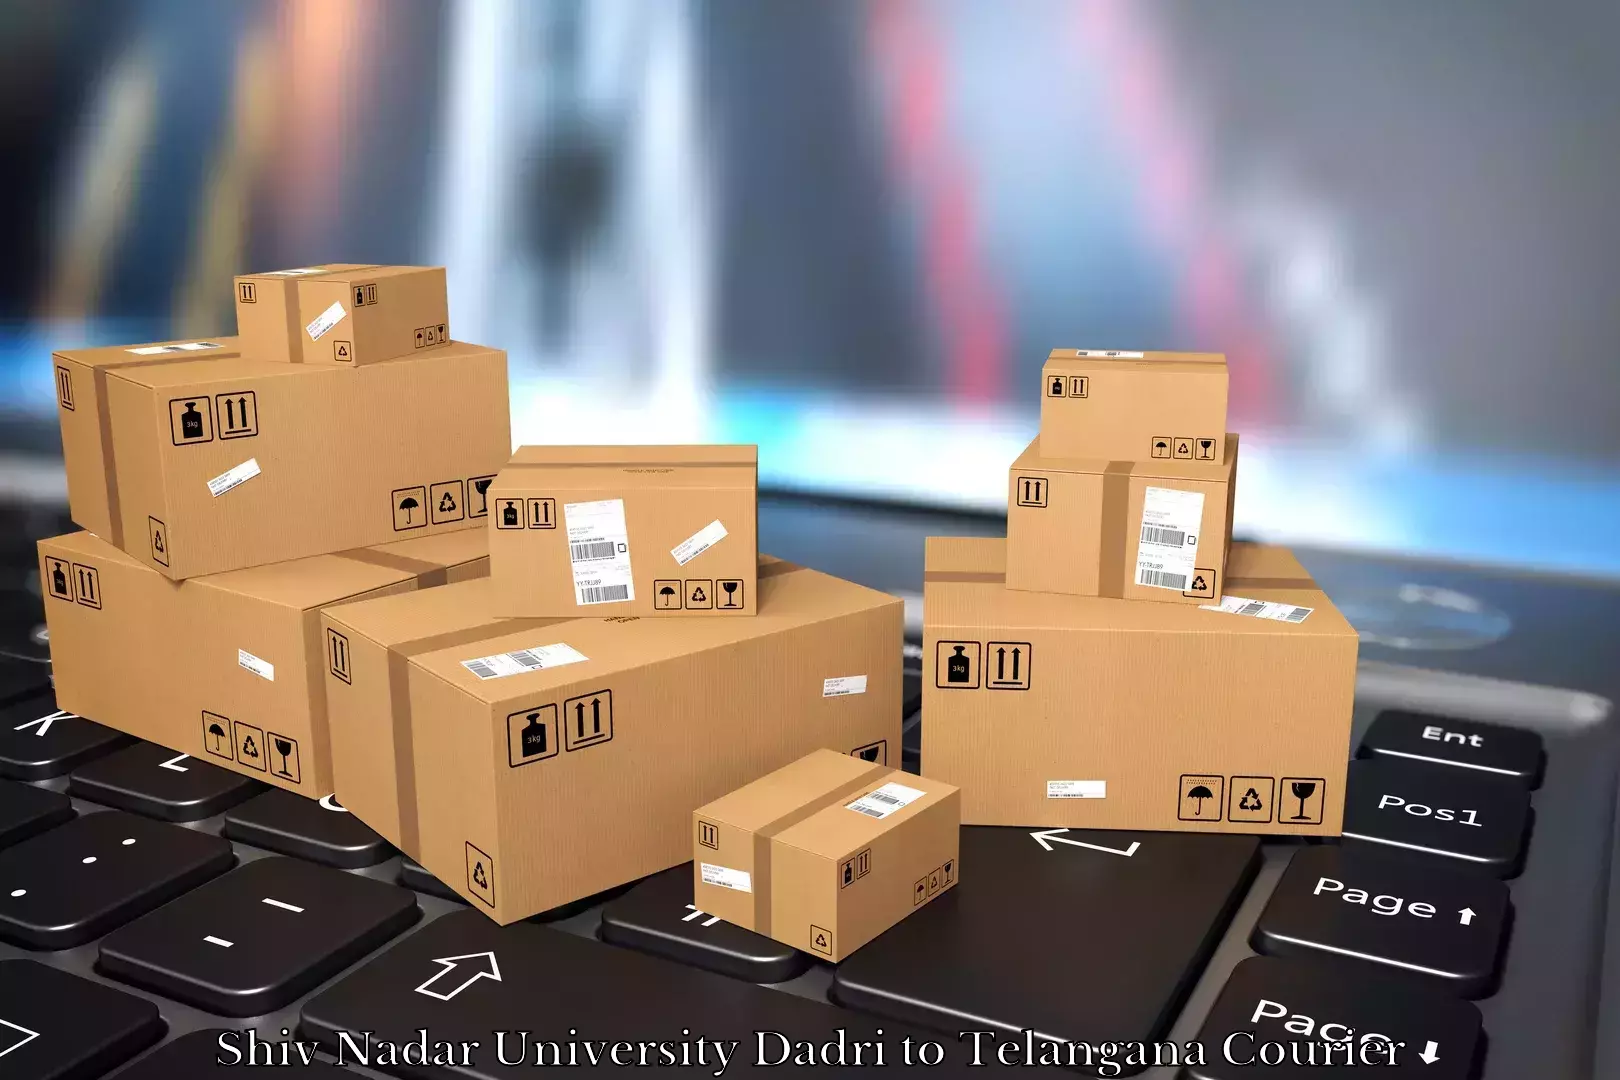 Reliable moving solutions Shiv Nadar University Dadri to IIT Hyderabad